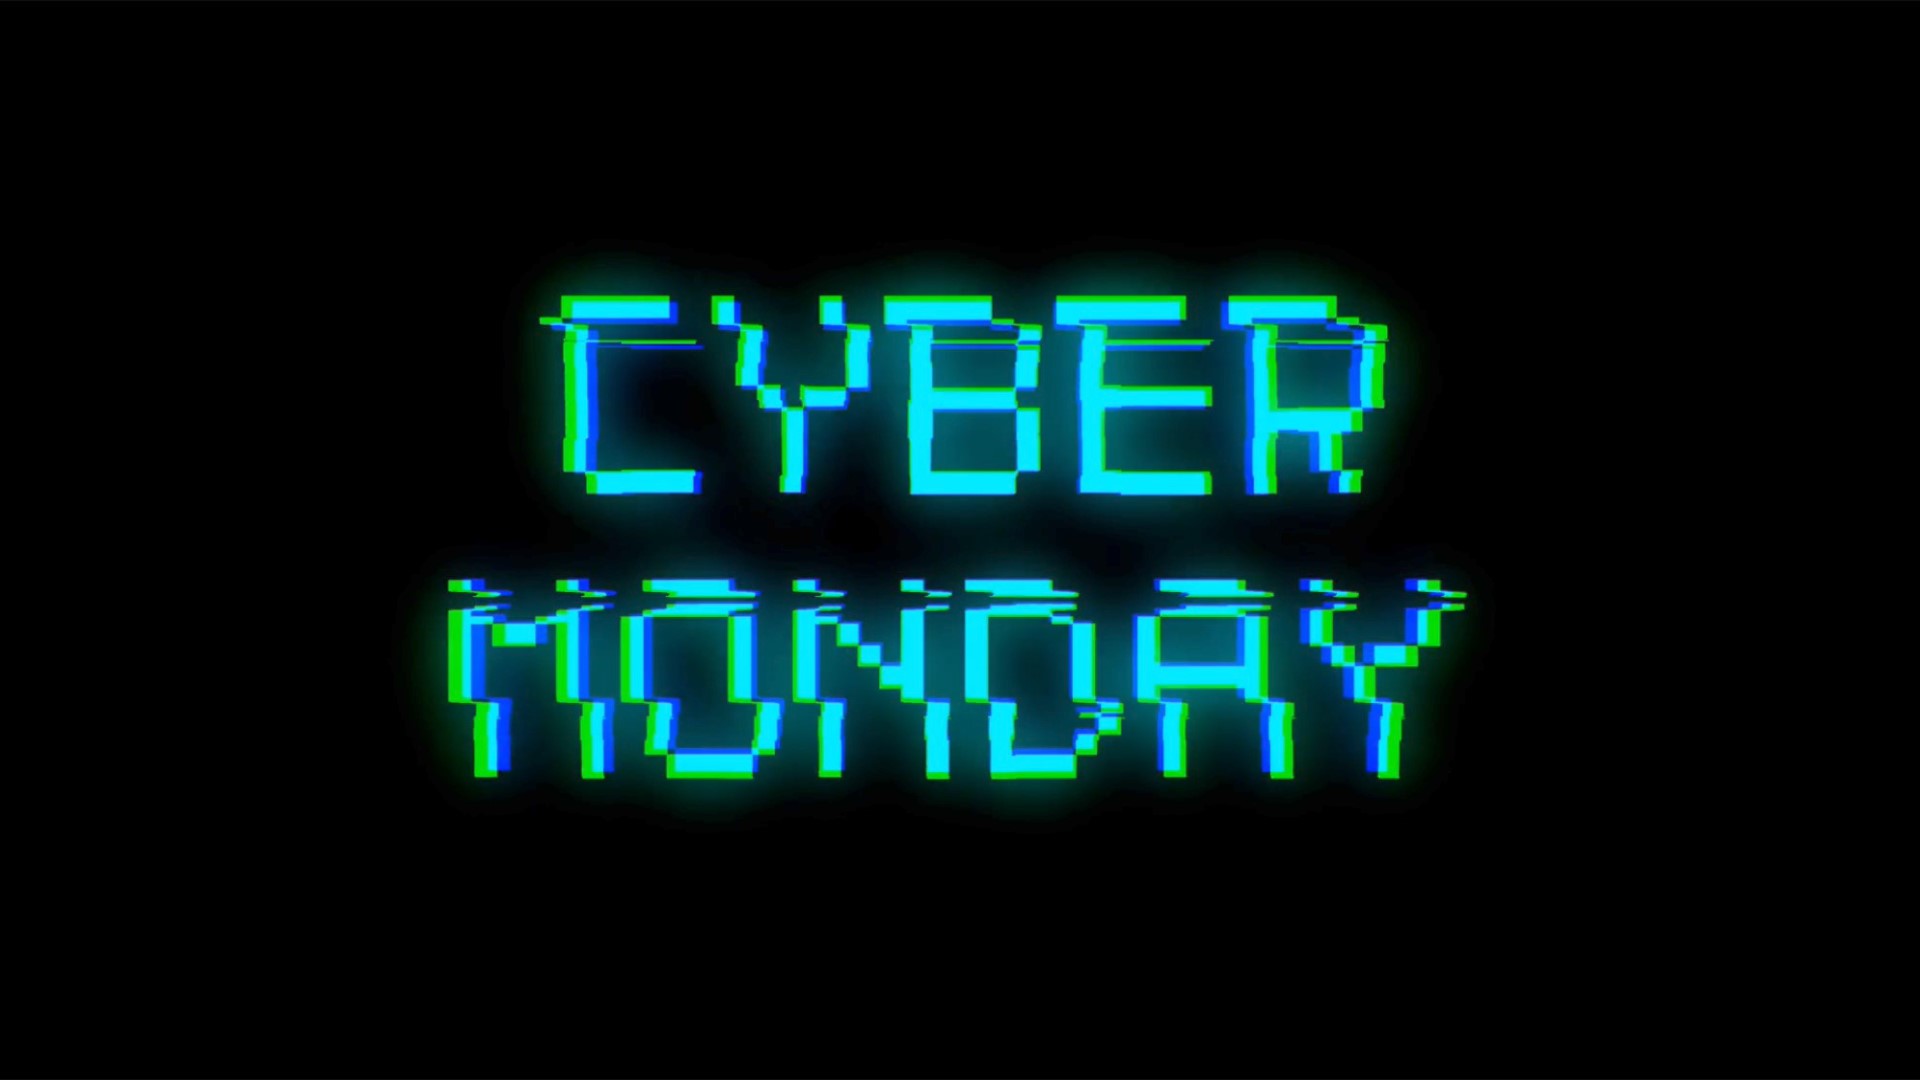 Black Friday can sometimes be a hassle, so stay at home and wait for Cyber Monday! Veuer's Lenneia Batiste has more.